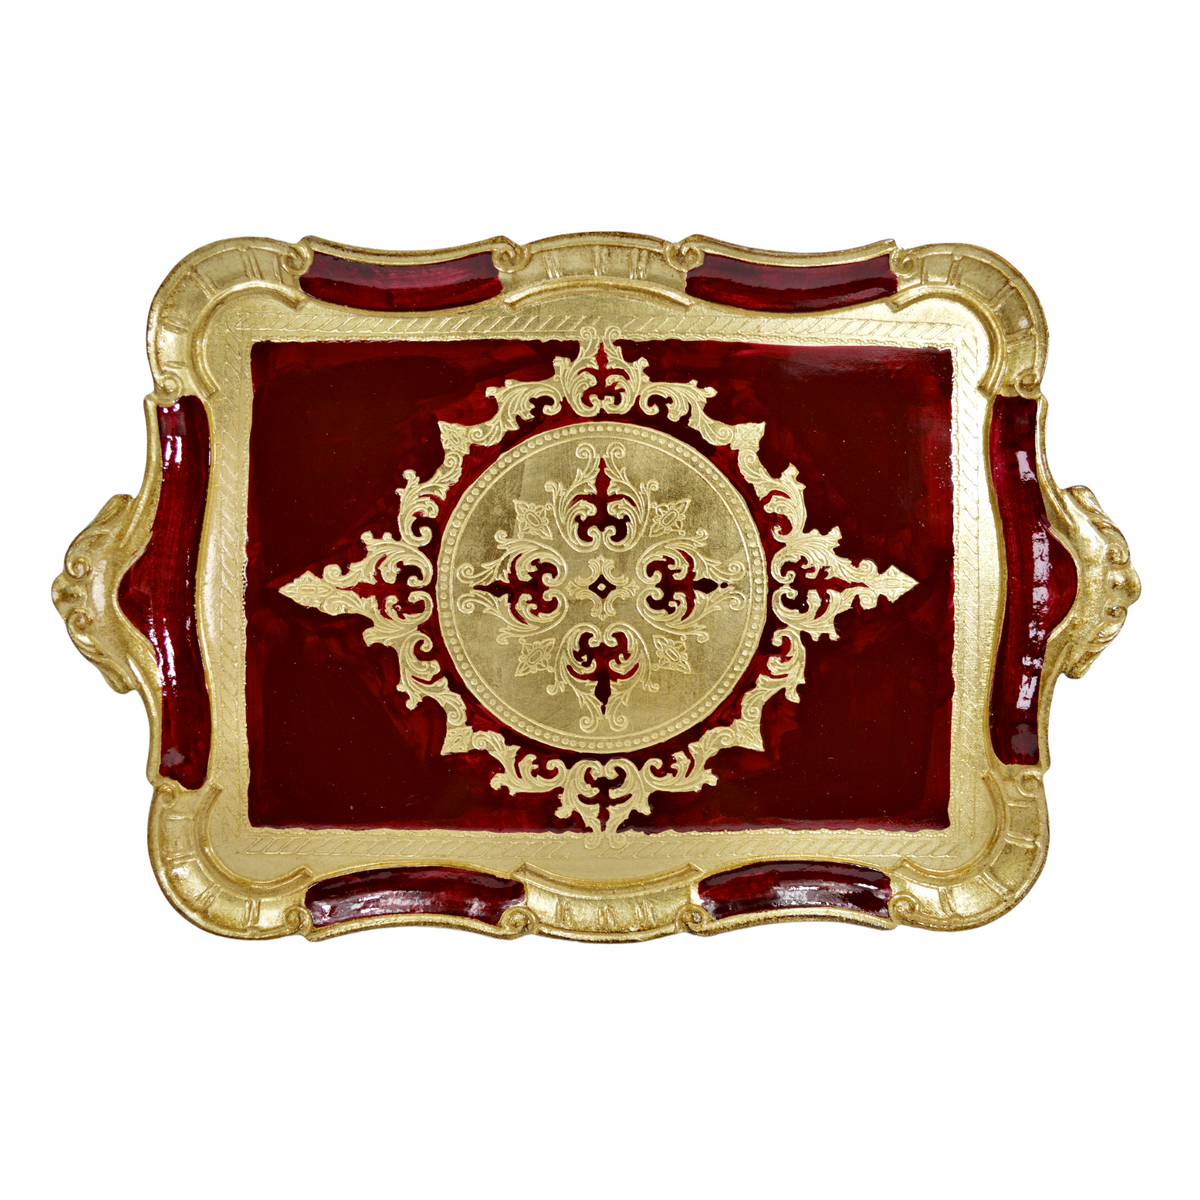 Florentine Carved Wood Tray, Rectangle Handles, Multiple colors and sizes - My Italian Decor